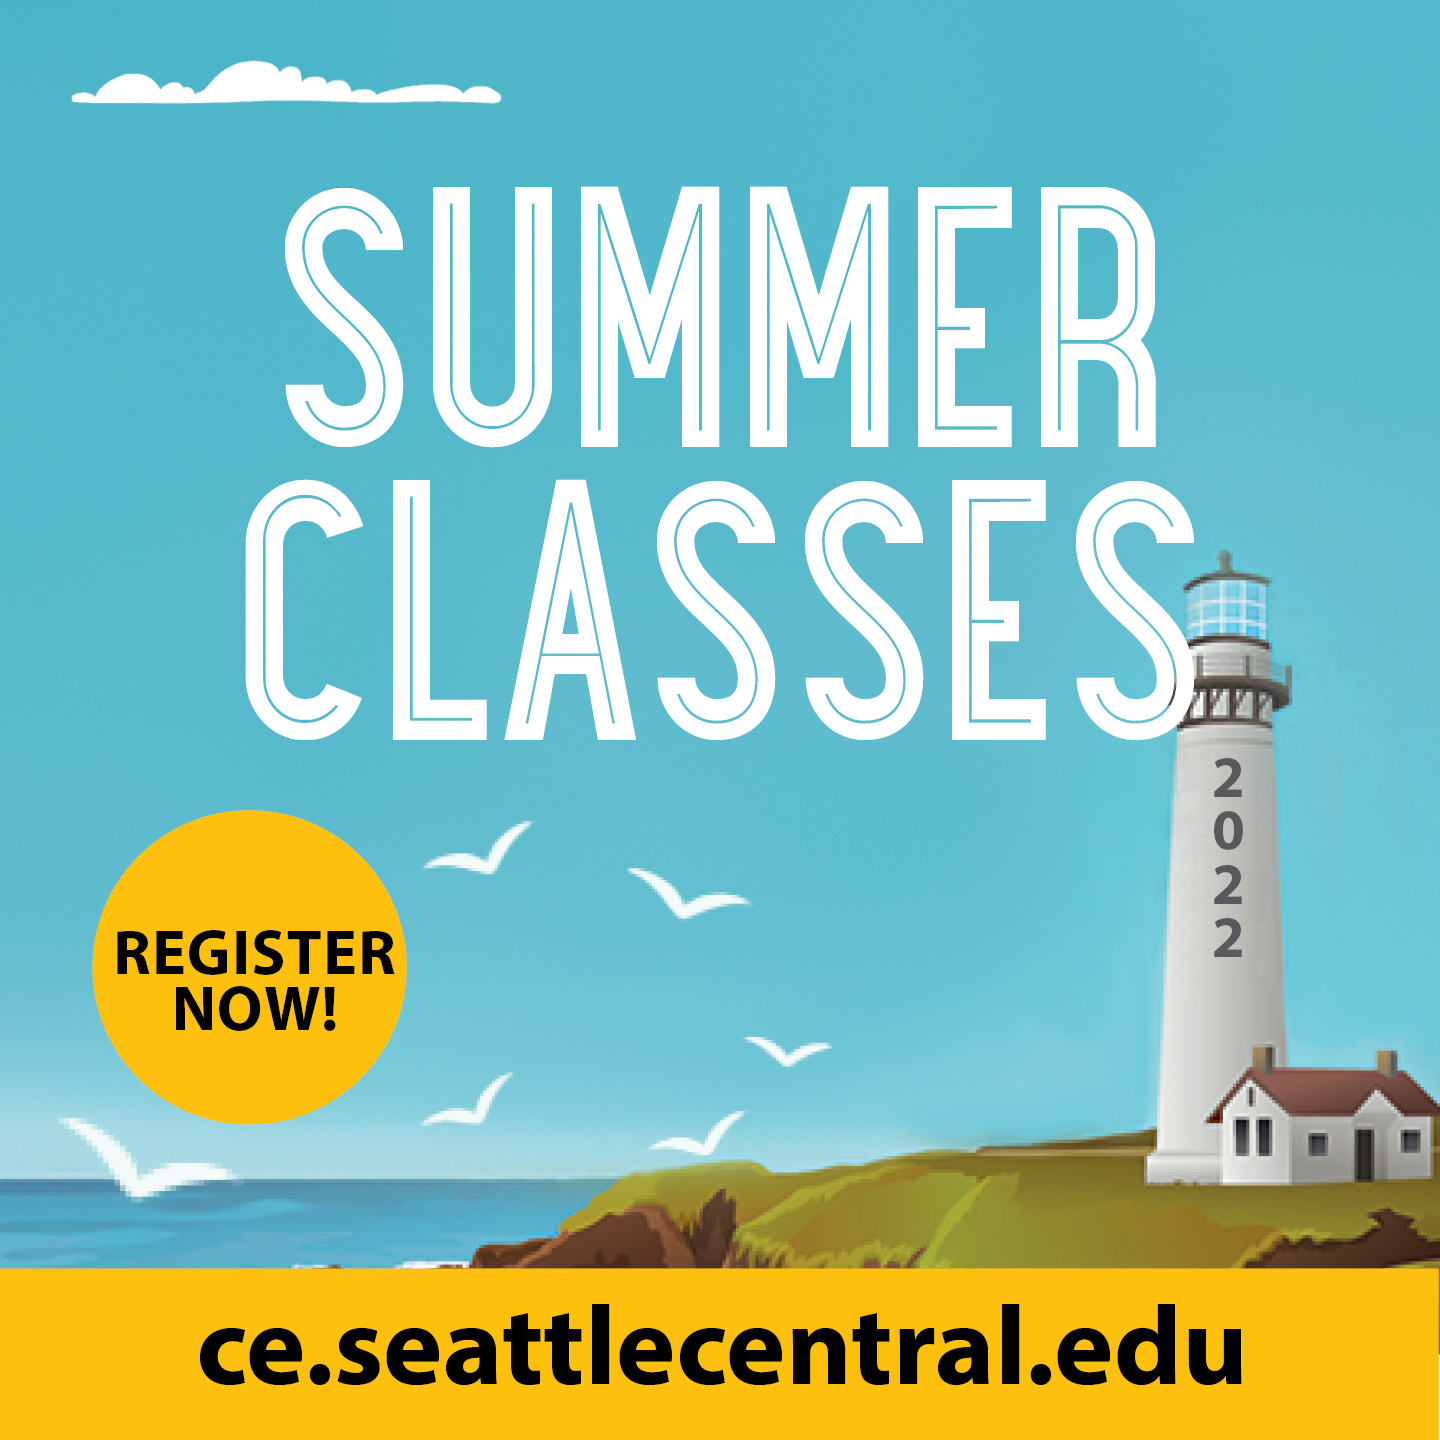 Summer Classes 2022 square image with lighthouse, sea and seagulls - Continuing Education at Seattle Central College